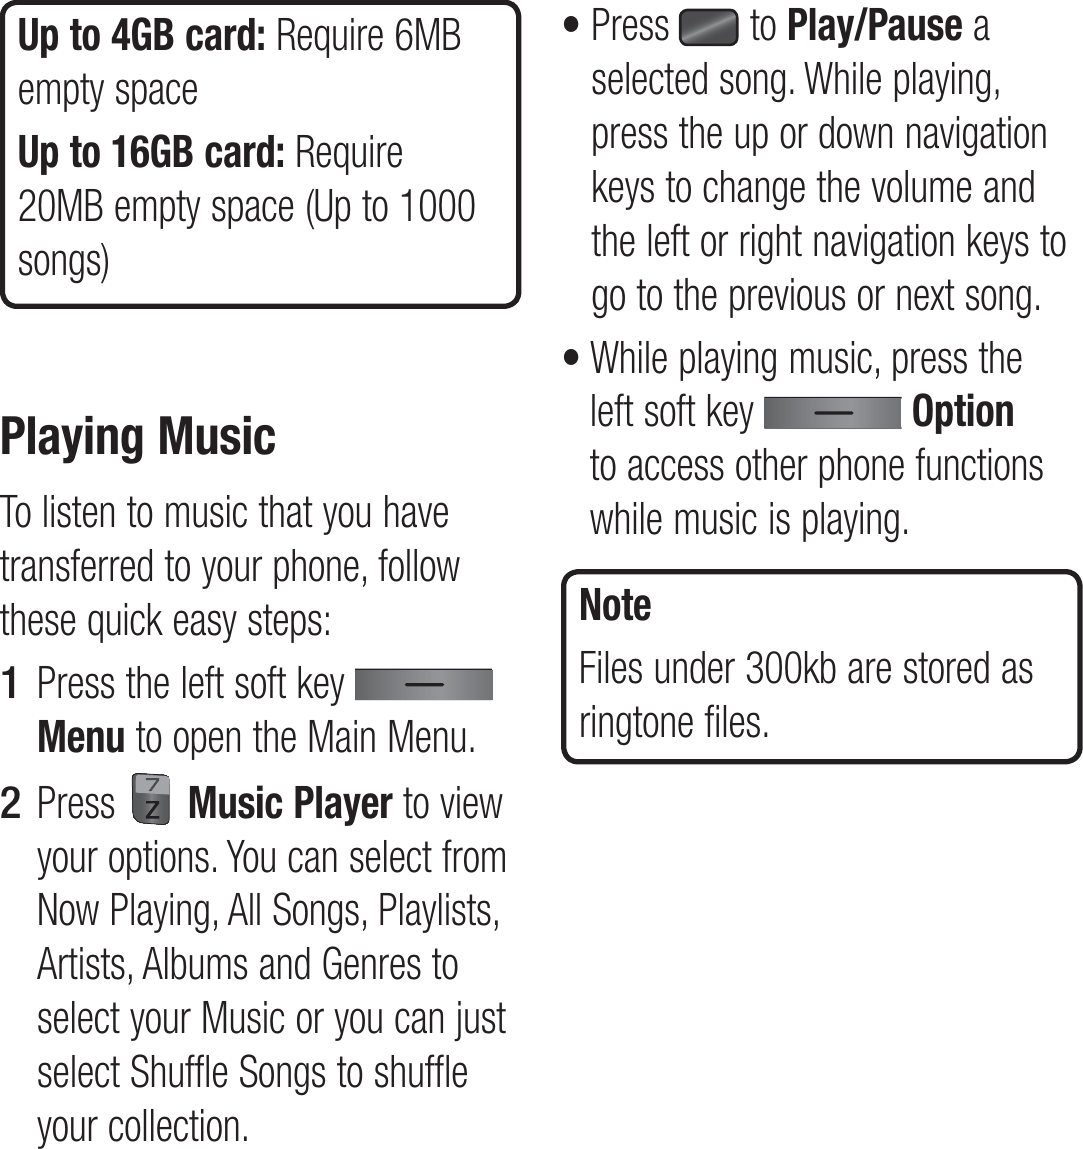 Up to 4GB card: Require 6MB empty spaceUp to 16GB card: Require 20MB empty space (Up to 1000 songs)Playing MusicTo listen to music that you have transferred to your phone, follow these quick easy steps:Press the left soft key   Menu to open the Main Menu. Press   Music Player to view your options. You can select from Now Playing, All Songs, Playlists, Artists, Albums and Genres to select your Music or you can just select Shuffle Songs to shuffle your collection.1 2 •  Press   to Play/Pause a selected song. While playing, press the up or down navigation keys to change the volume and the left or right navigation keys to go to the previous or next song.•  While playing music, press the left soft key   Option to access other phone functions while music is playing. NoteFiles under 300kb are stored as ringtone files.